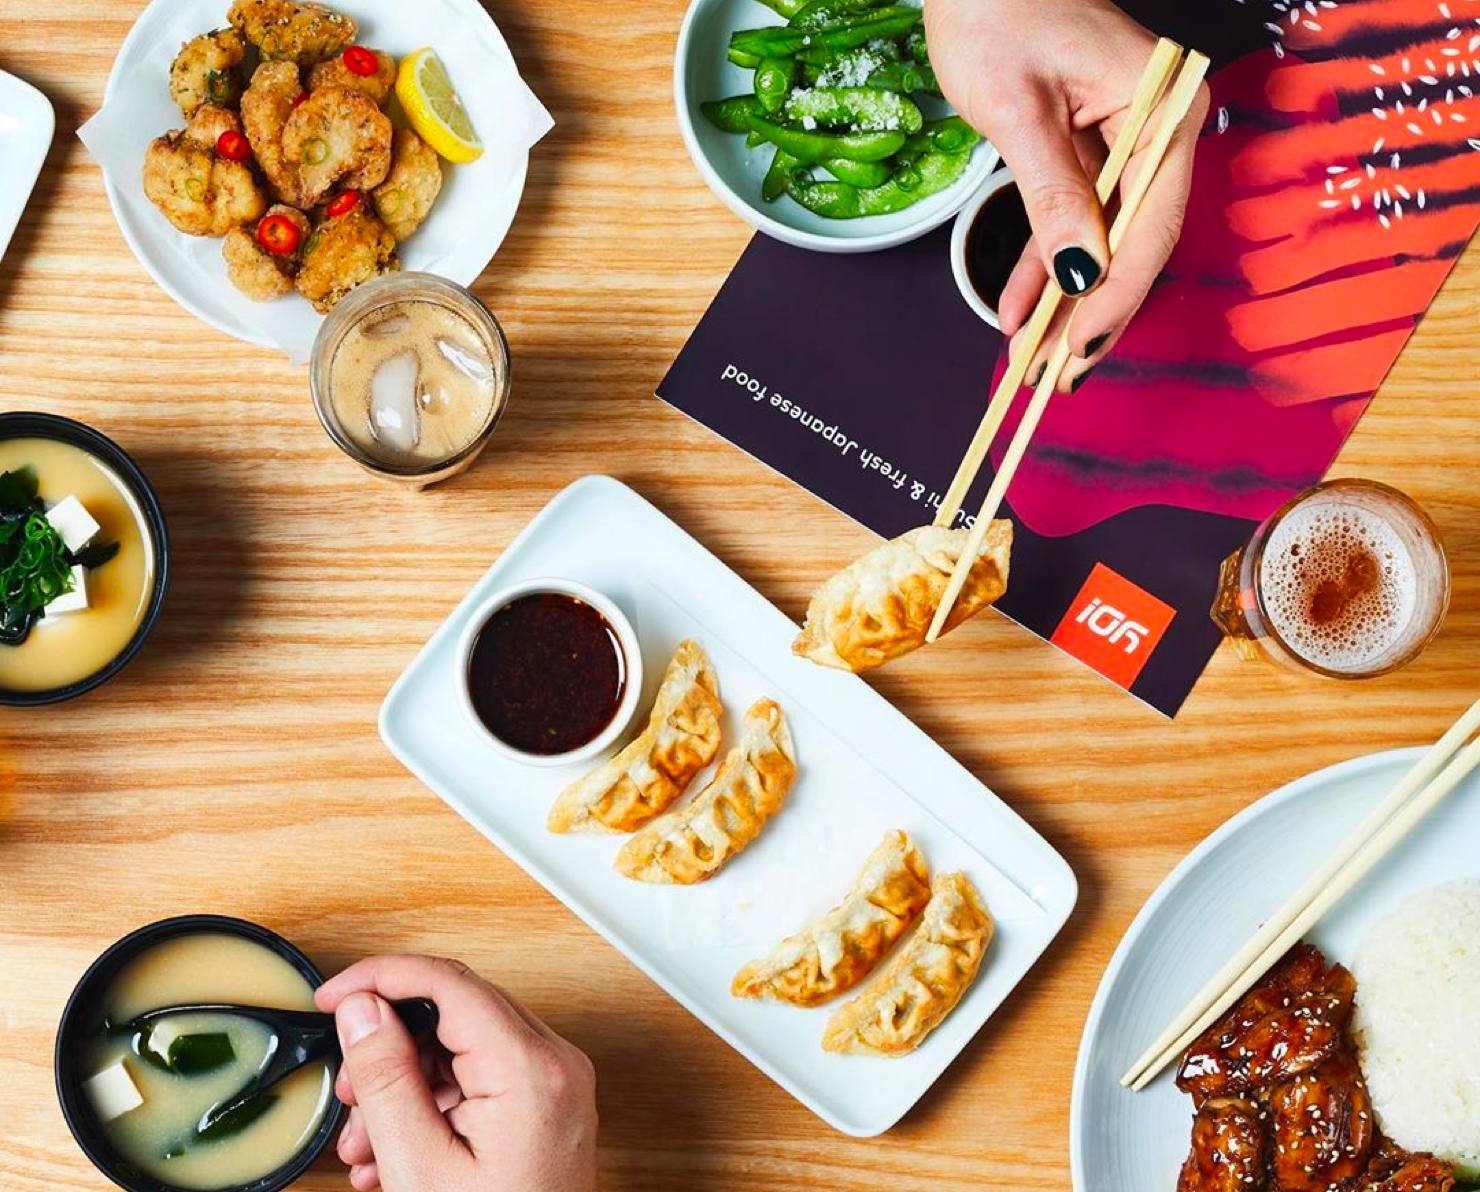 YO! Sushi - Japanese food takeaway or delivery near you now